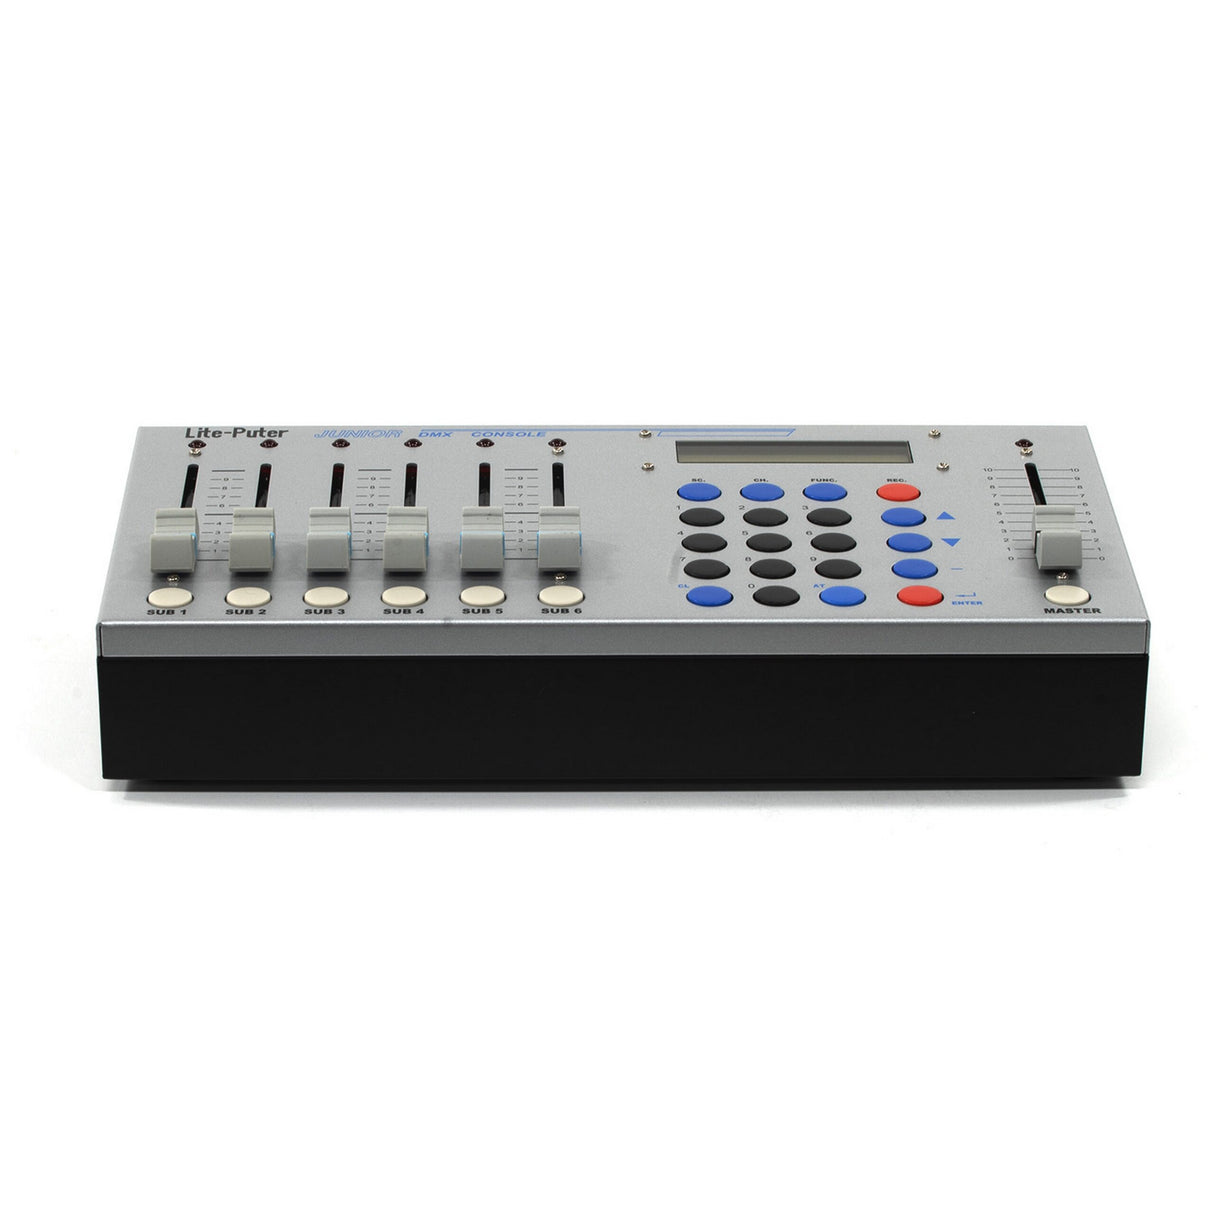 Ikan JUNIOR Lite-Puter 6-Channel Compact DMX Lighting Console Controller